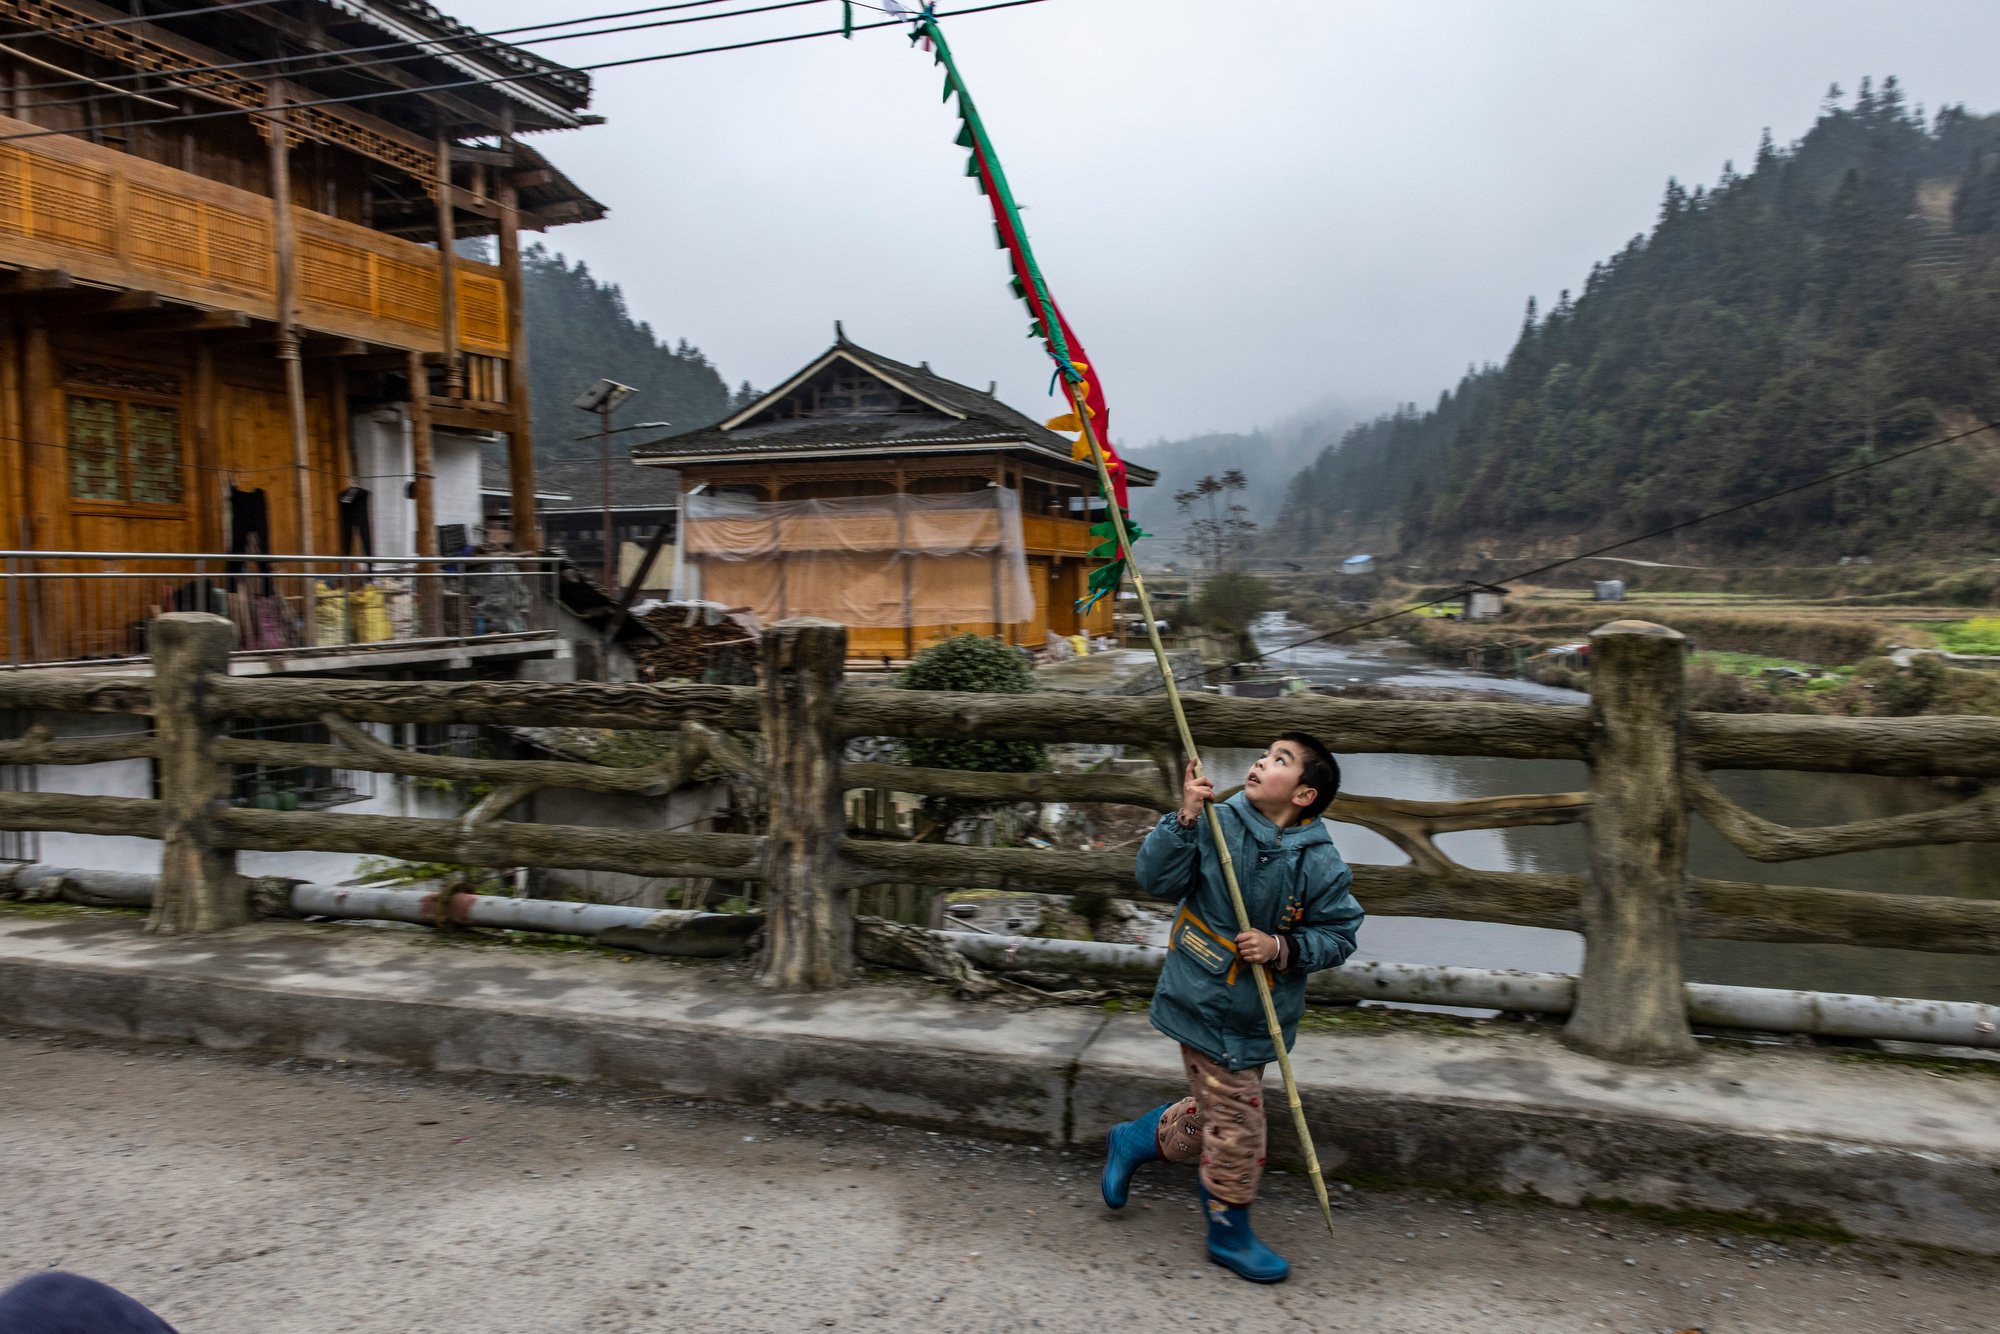  A boy with the village flag runs in front of the crowd that is accompanying the buffalo to the arena, where it will attend the first fight of the year. Zhengying village in Guizhou, China. 